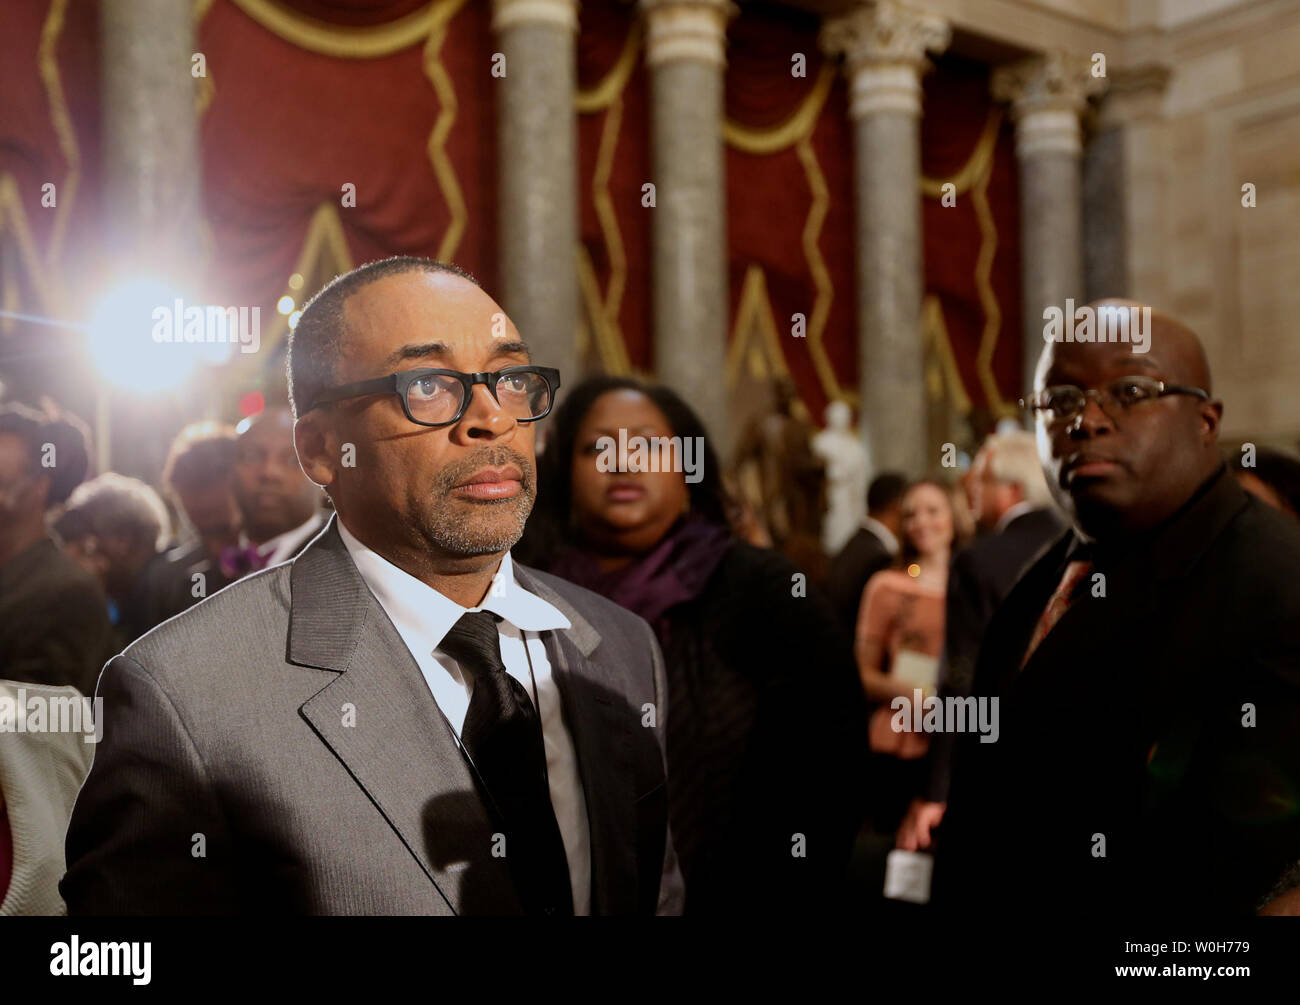 Film maker Spike Lee attends a Congressional Gold Medal ceremony which was posthumously presented to victims of the 1963 Birmingham bombing, at the U.S. Capitol, in Washington on September 10, 2013.  The medal is awarded in recognition of victims Addie Mae Collins, Denise McNair, Carole Robertson and Cynthia Wesley, and how their sacrifice served as a catalyst for the Civil Rights Movement.  UPI/Molly Riley Stock Photo